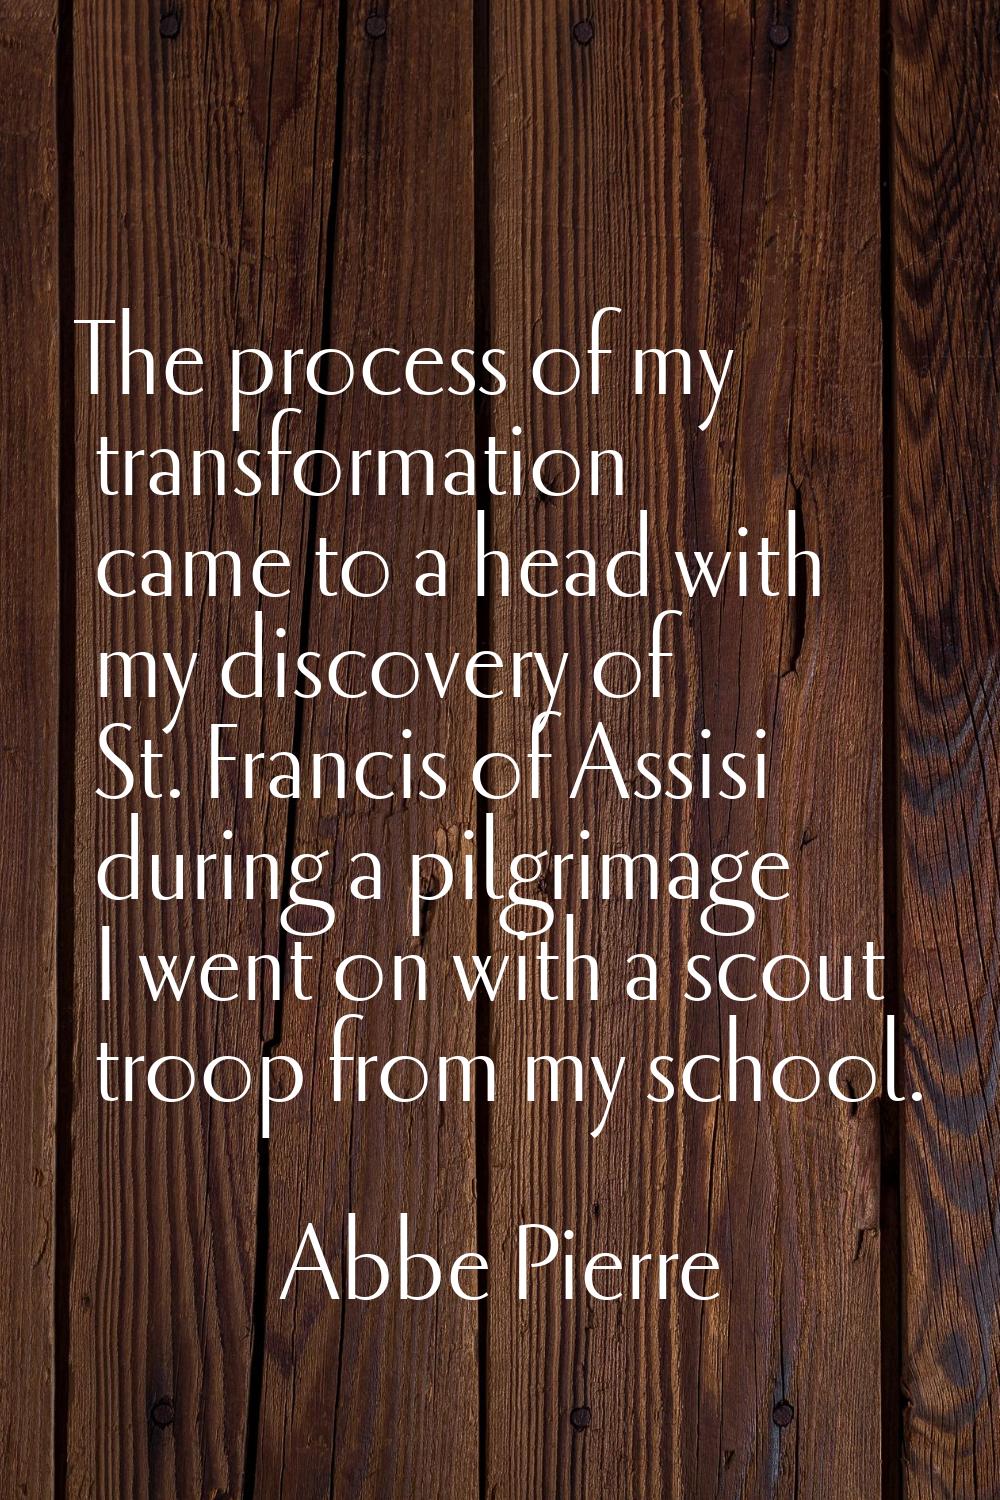 The process of my transformation came to a head with my discovery of St. Francis of Assisi during a